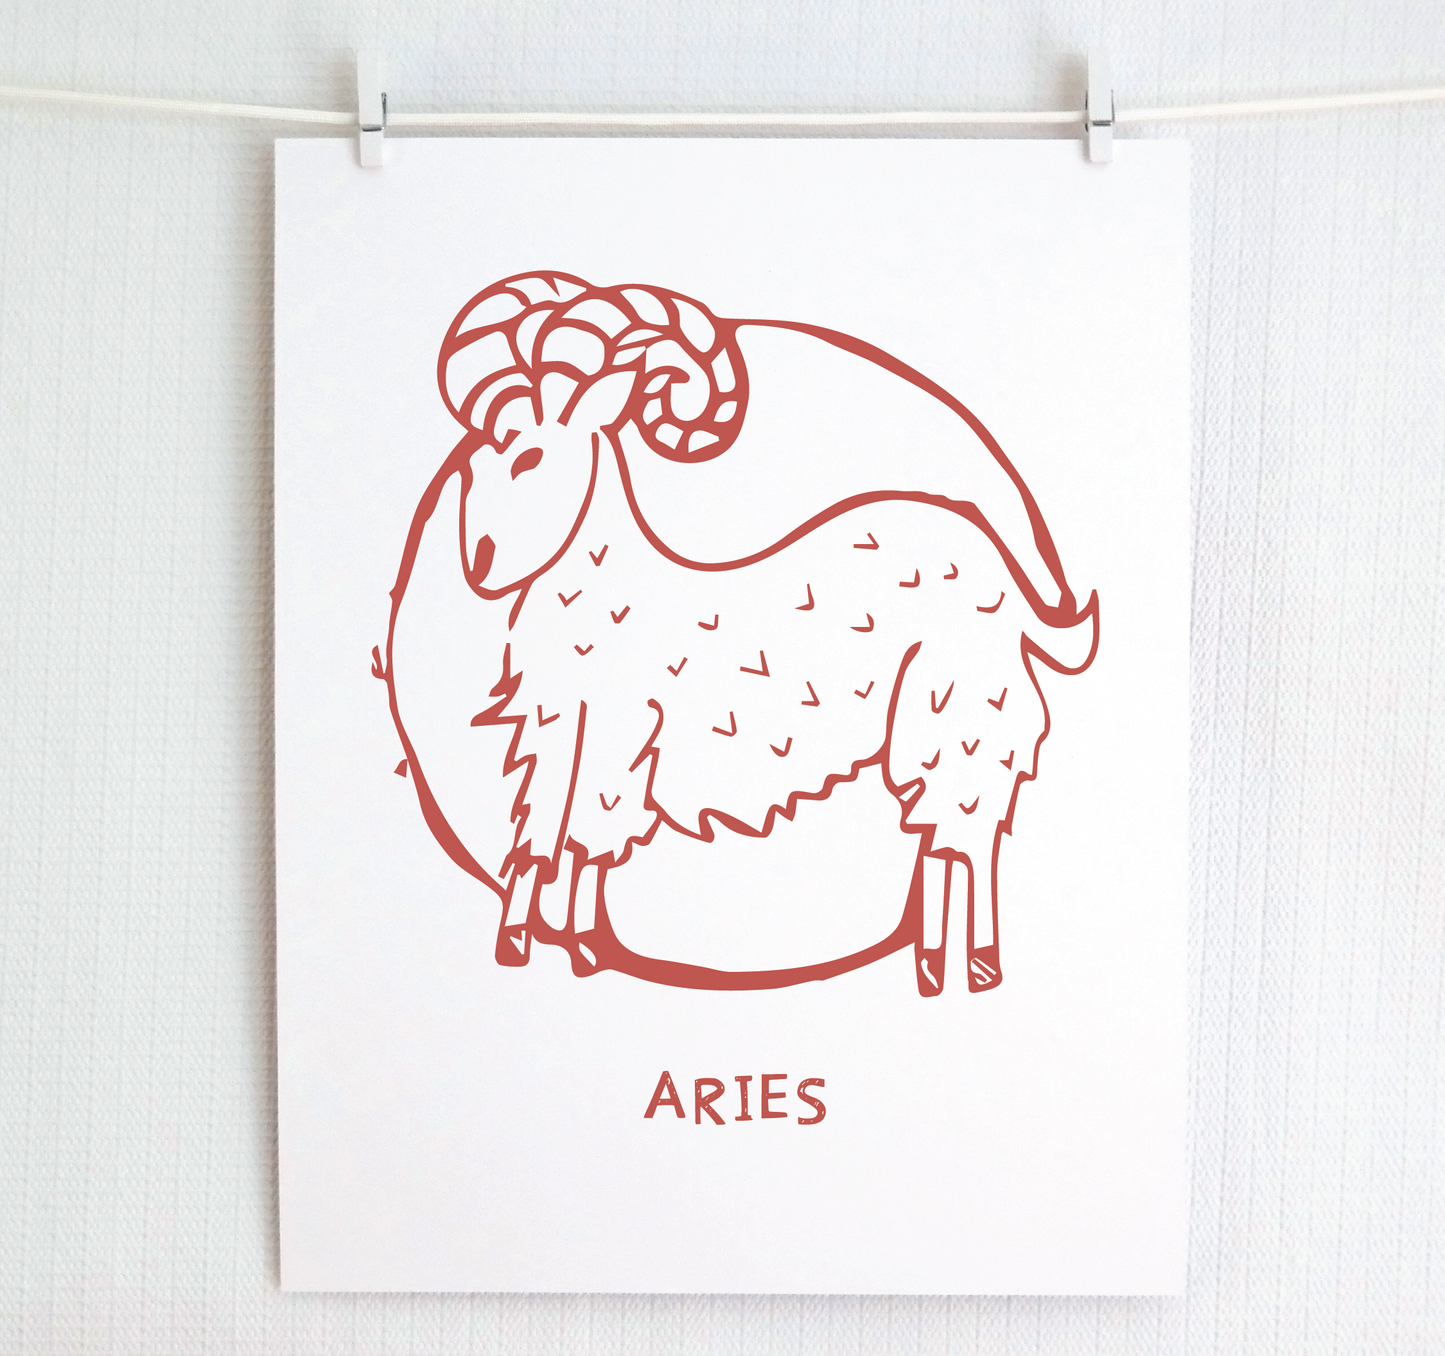 Signs of the Zodiac: ARIES